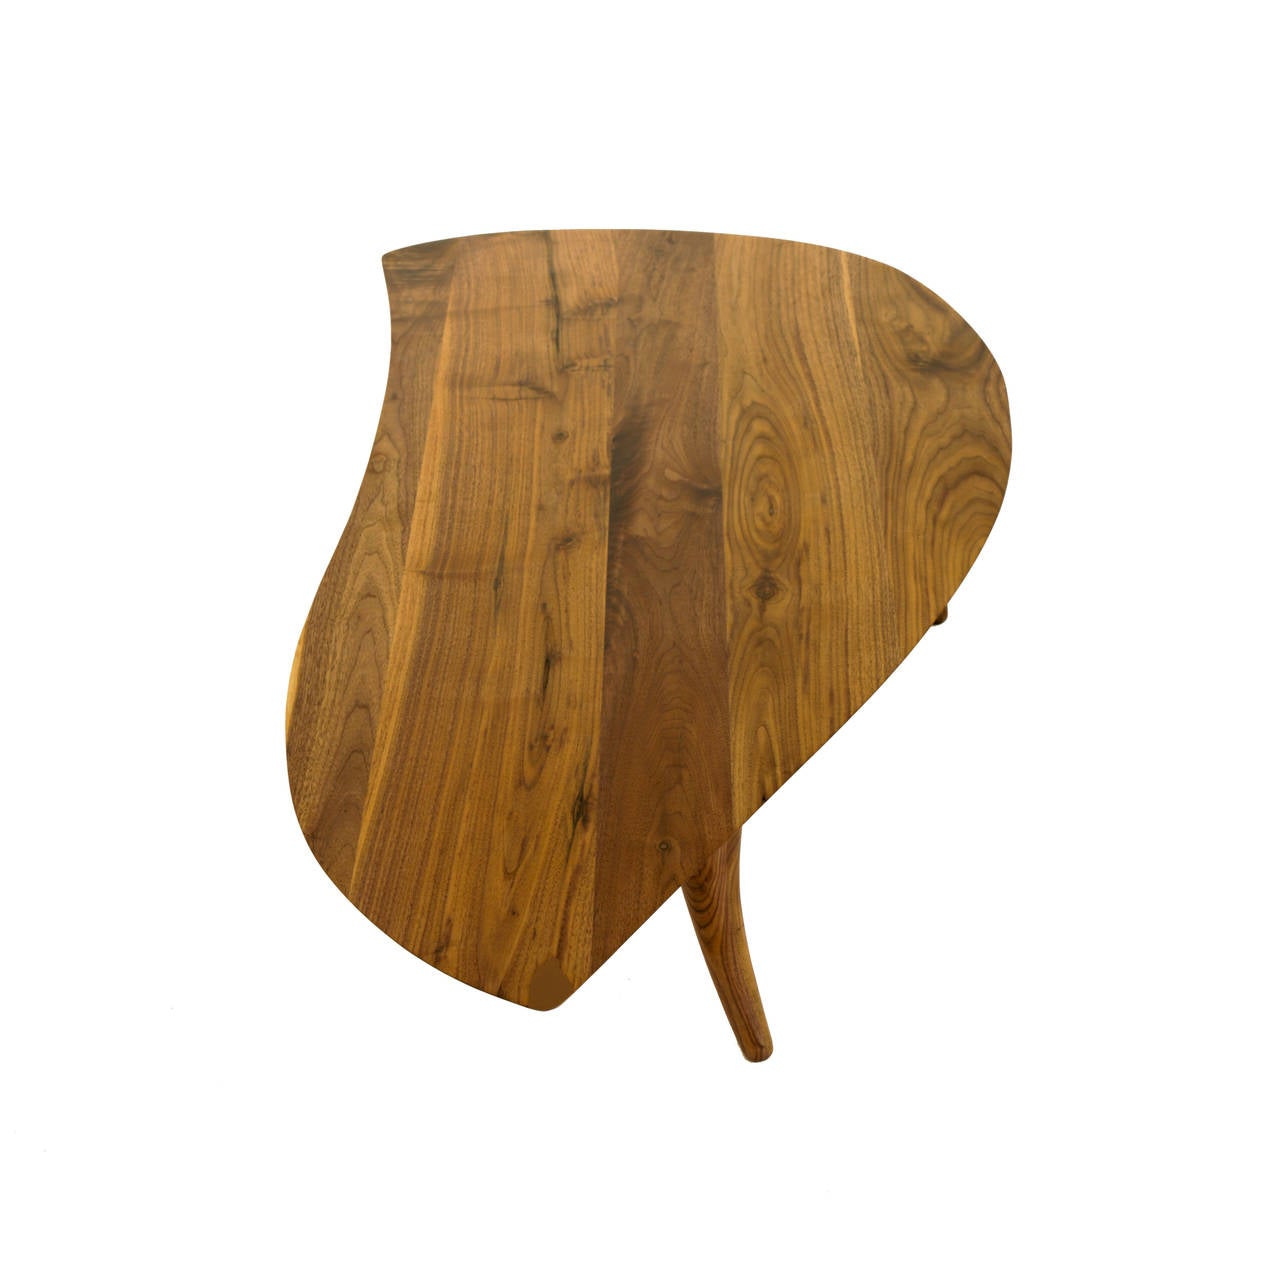 American Sculptural Walnut Coffee Table with Curved Legs